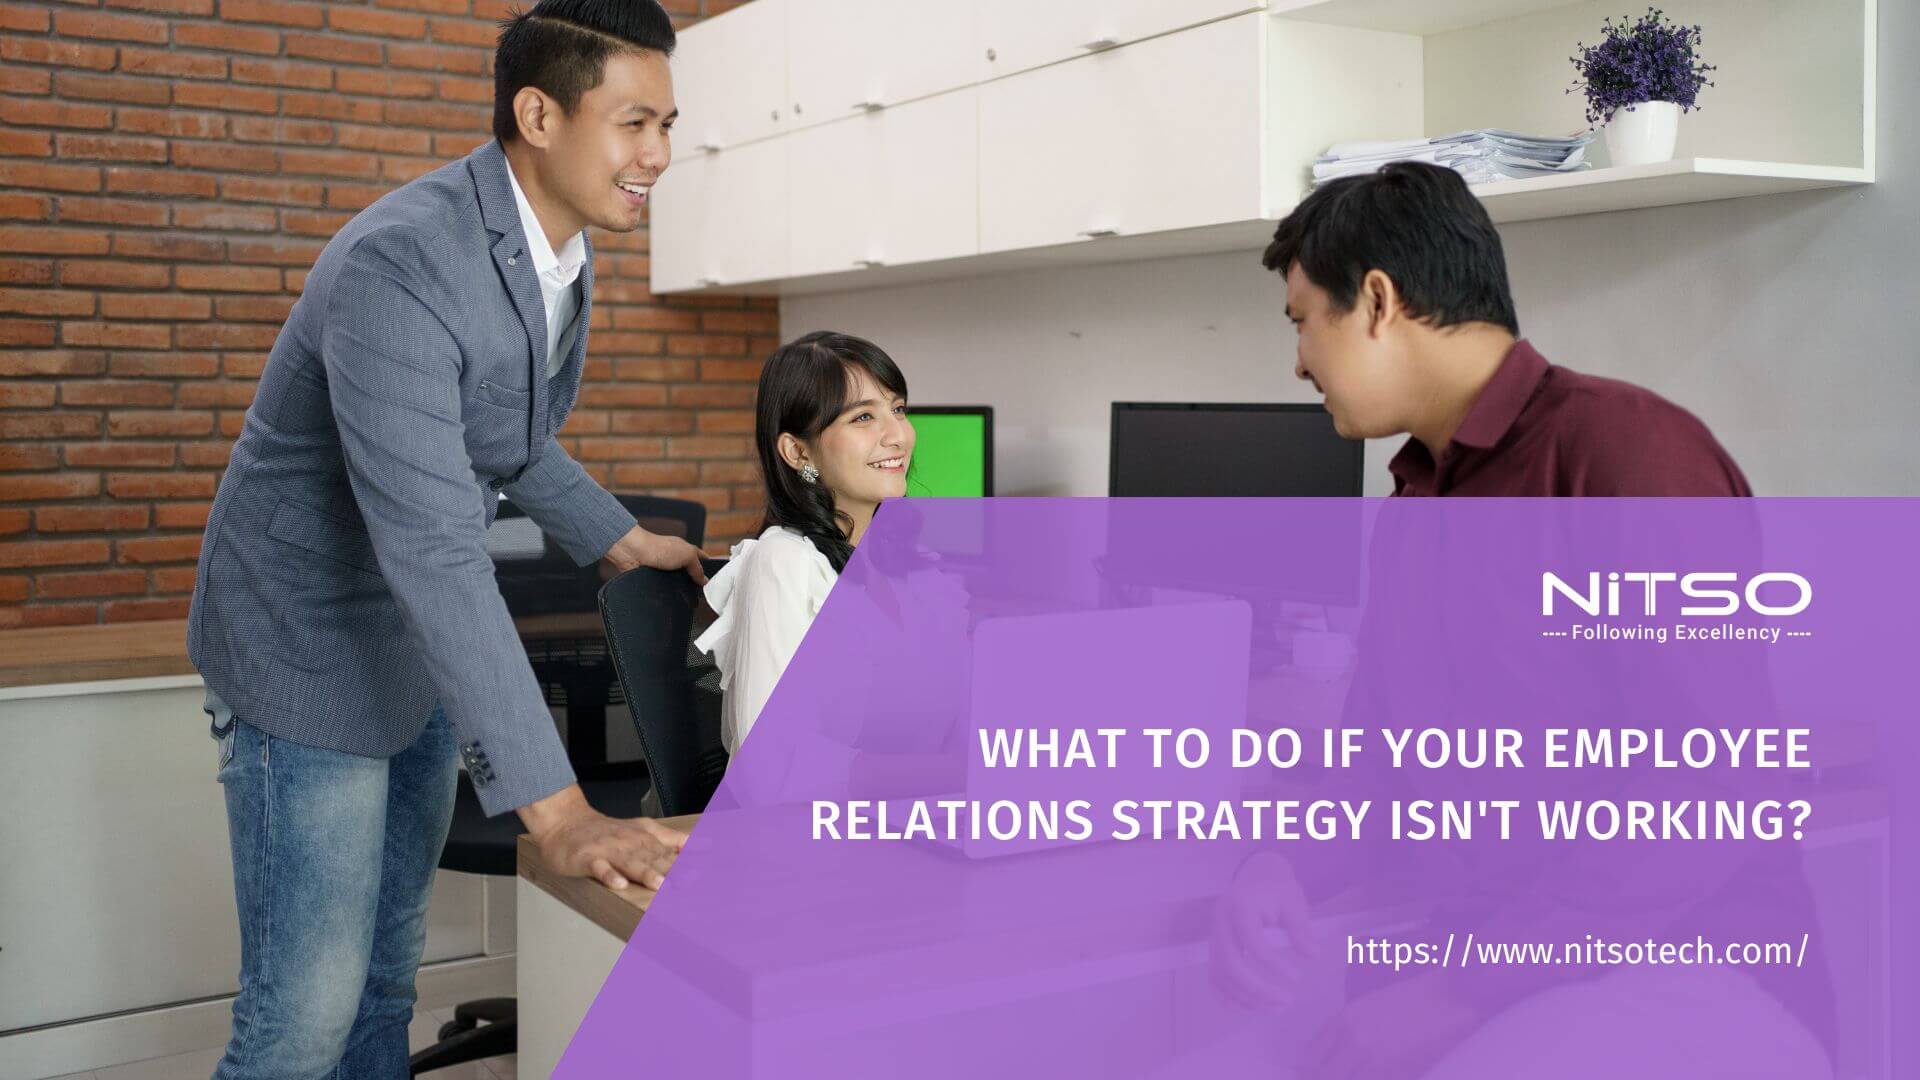 What to Do If Your Employee Relations Strategy Isn't Working